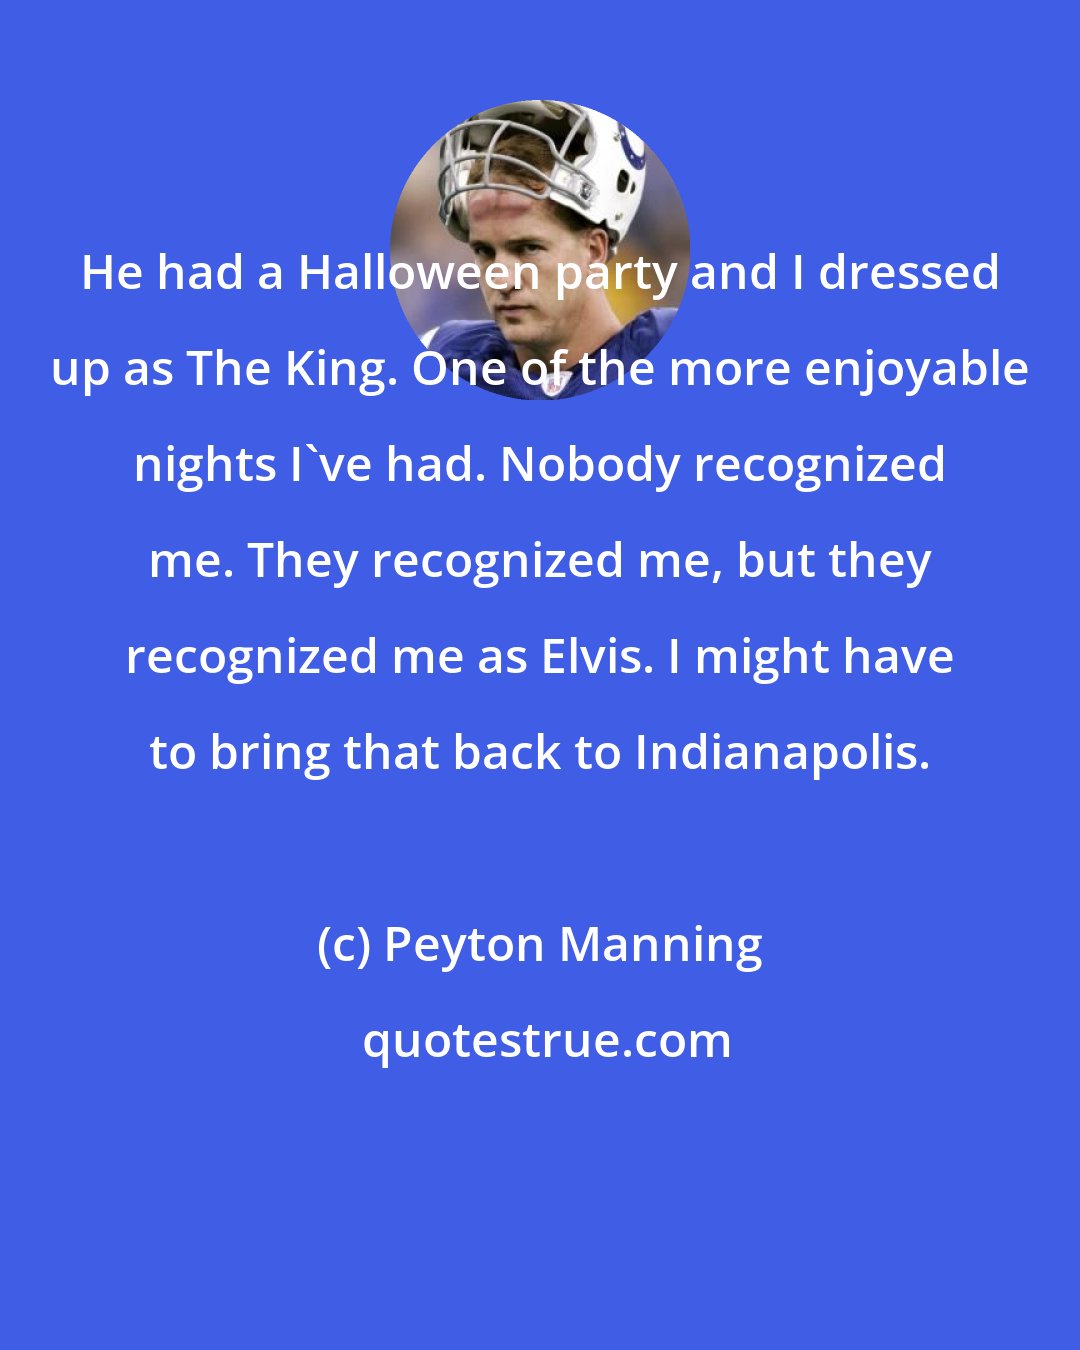 Peyton Manning: He had a Halloween party and I dressed up as The King. One of the more enjoyable nights I've had. Nobody recognized me. They recognized me, but they recognized me as Elvis. I might have to bring that back to Indianapolis.